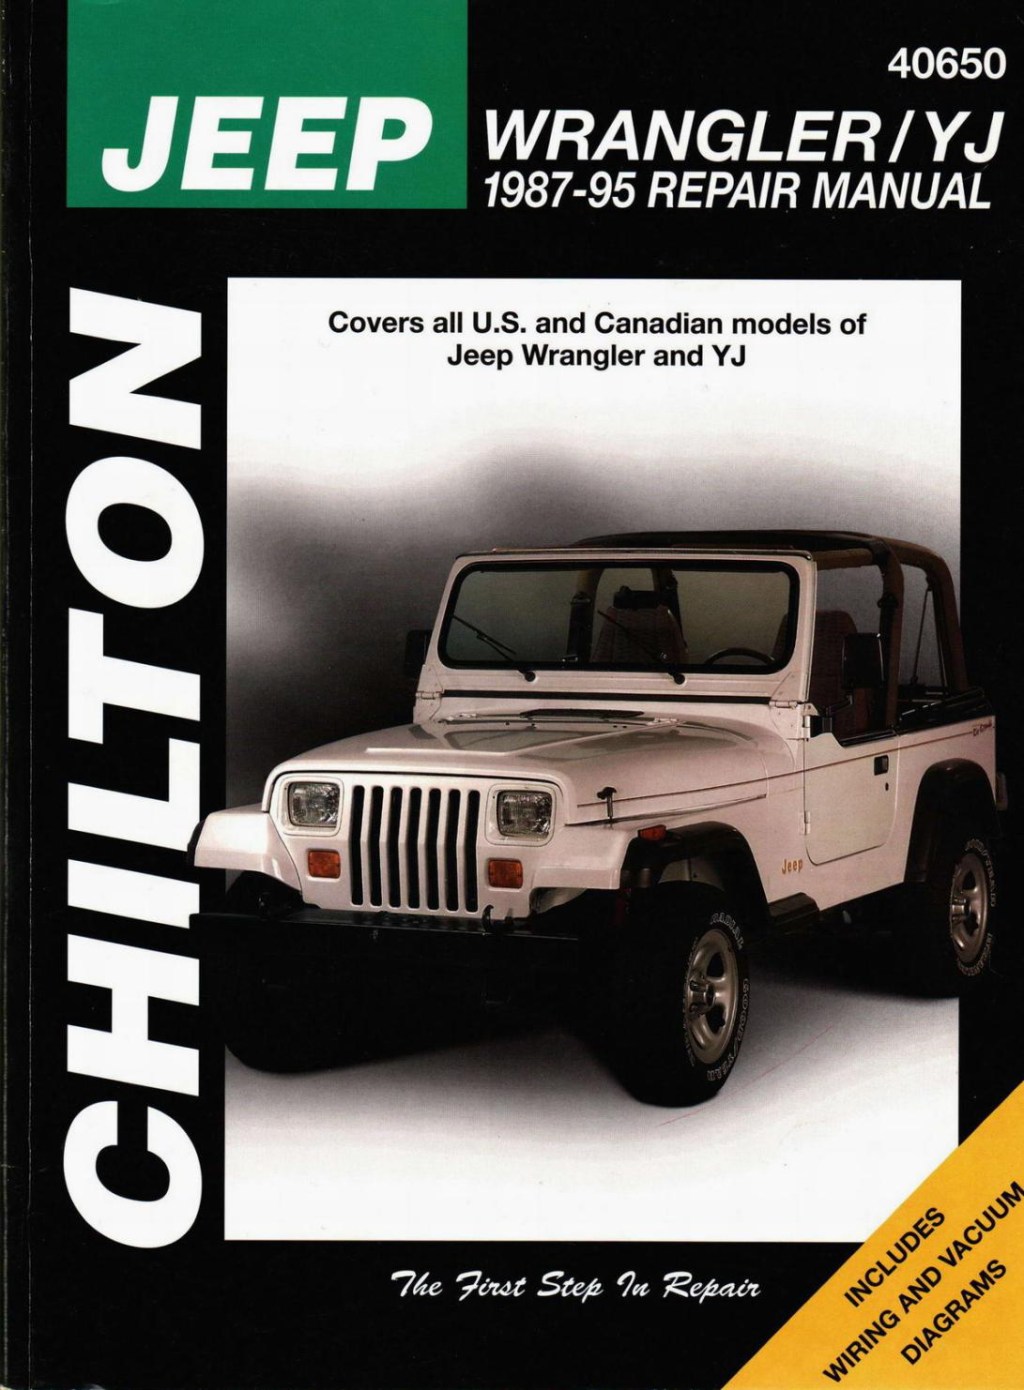 Picture of: Introducir + imagen  jeep wrangler yj owners manual